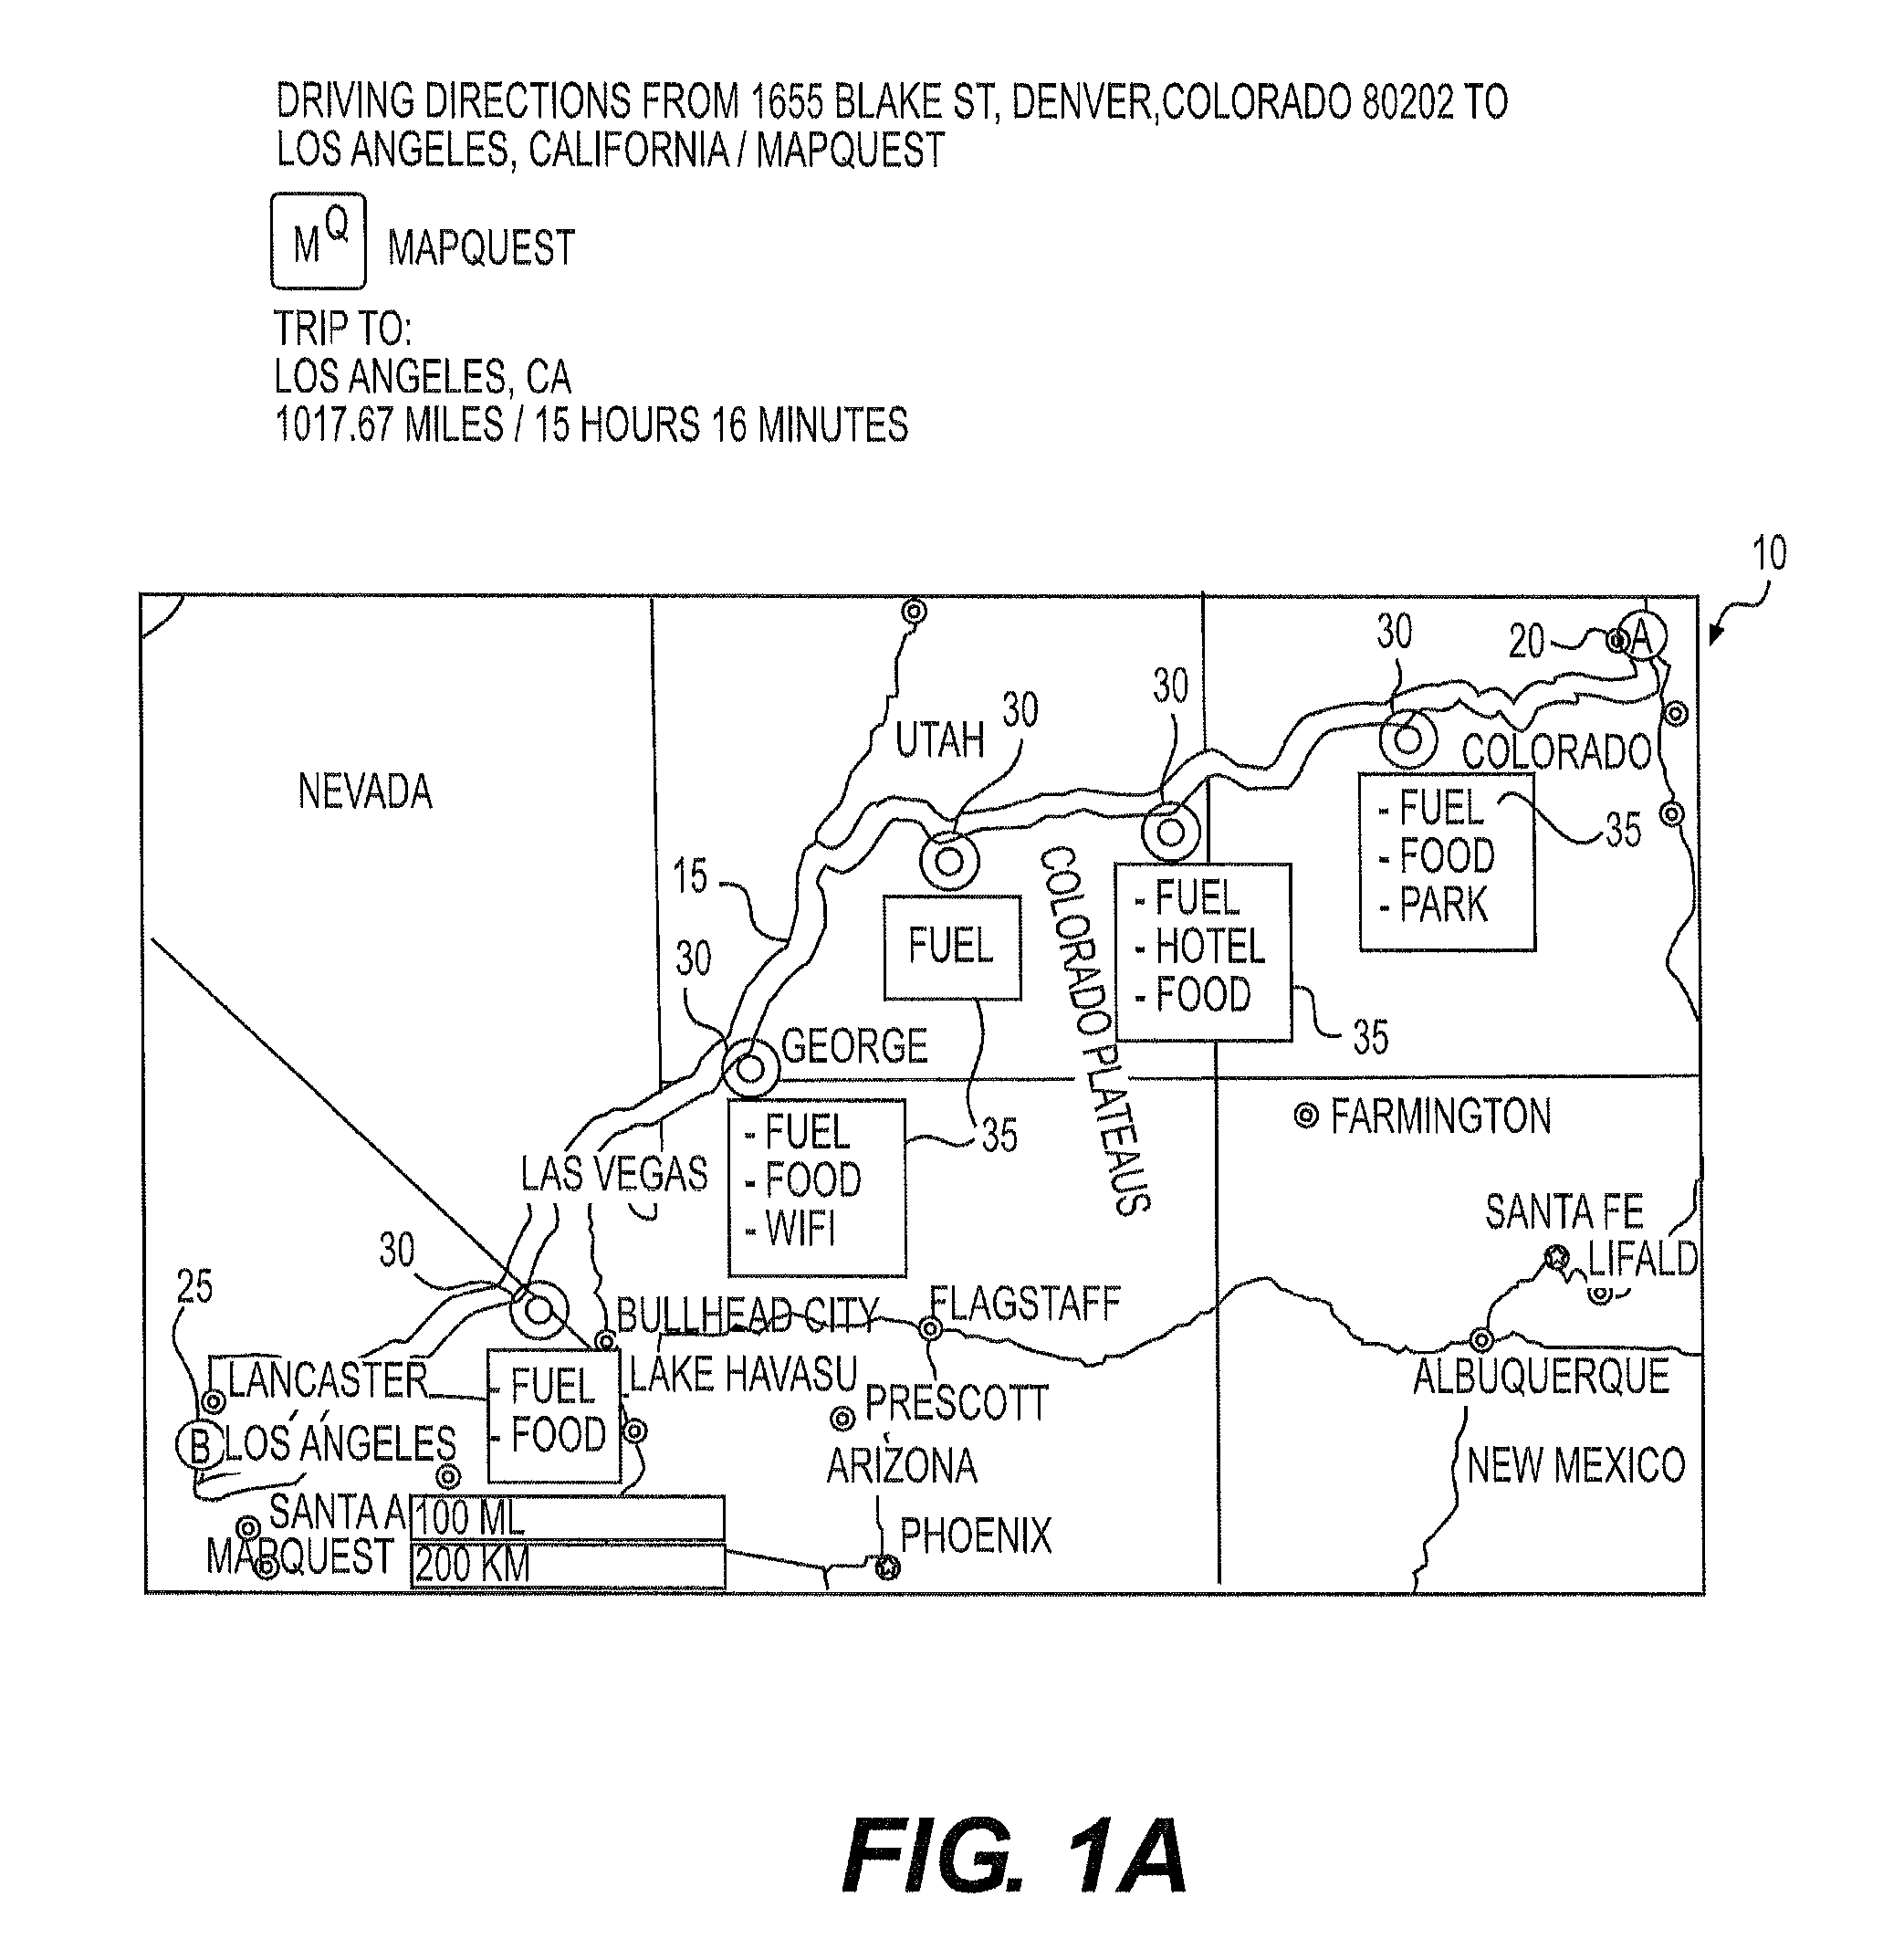 Systems and methods for providing mapping services including route break point recommendations